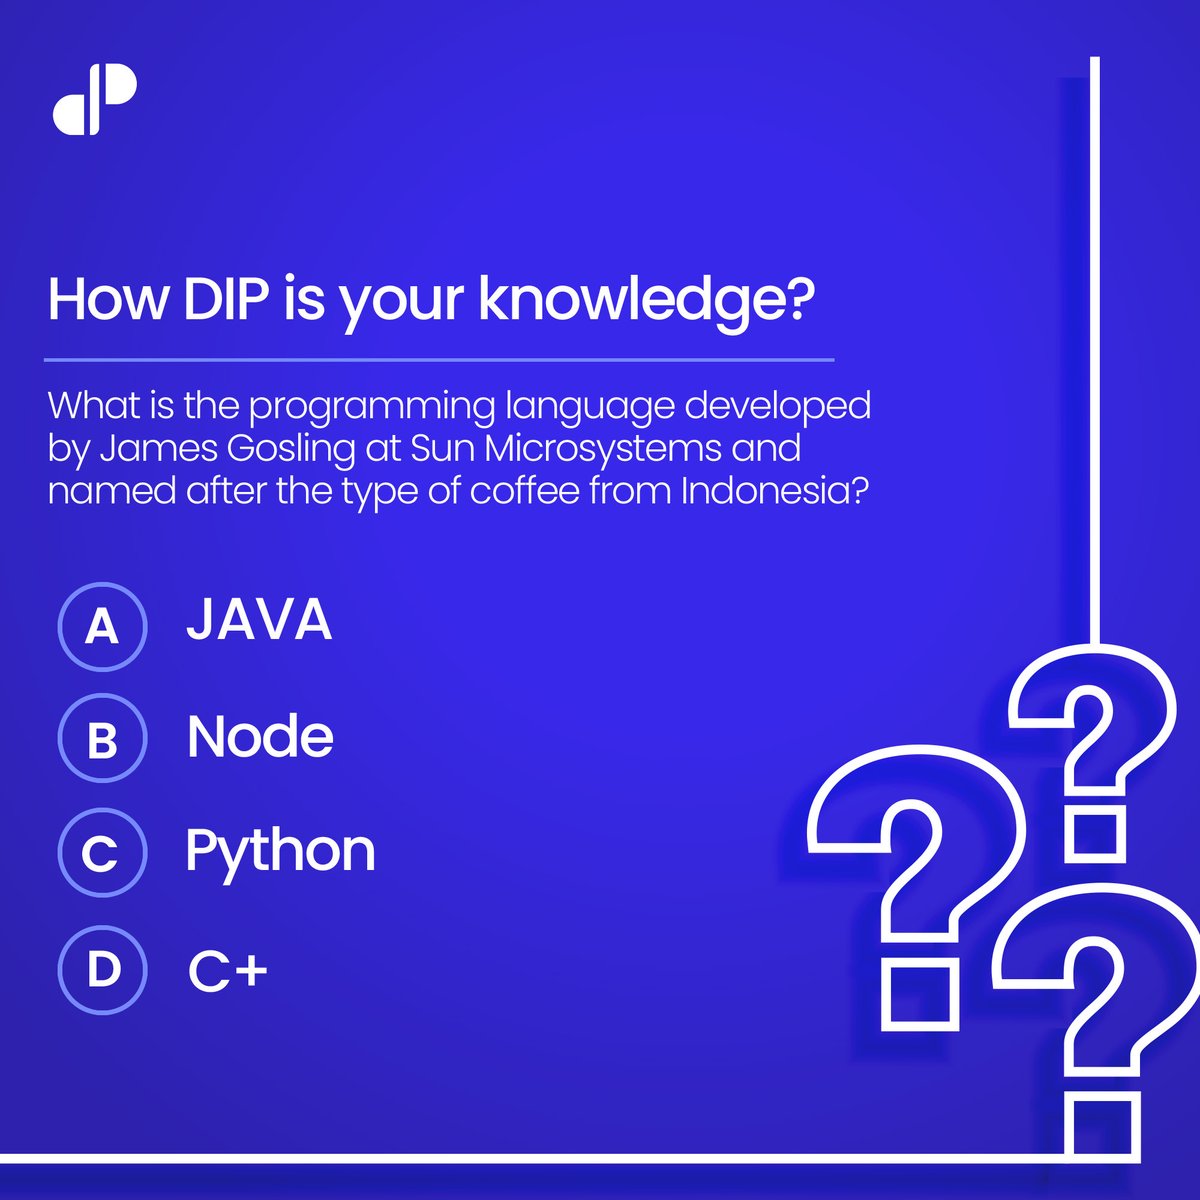 Techies Assemble!! 

We have a question for you. Please flood the comment section with your answers.

#DIPfellows #DIPFellowship #DIPTrivia #techtrivia #paidinternships #internship #internships #oppurtunity #internships2023